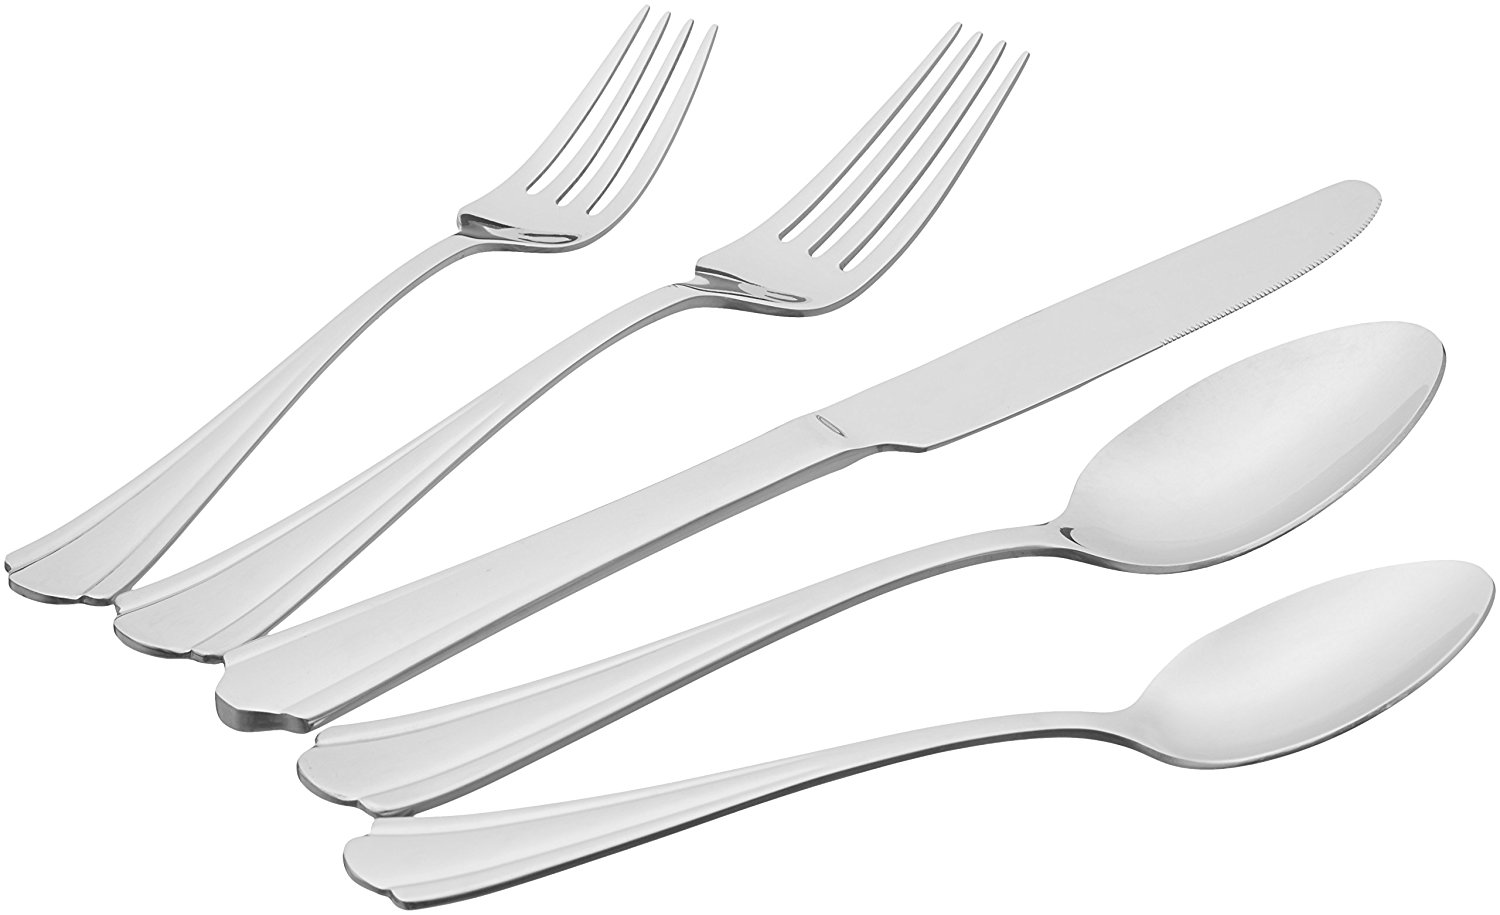 AmazonBasics 20-Piece Stainless Steel Flatware Set with Scalloped Edge, Service for 4 – Just $12.22!